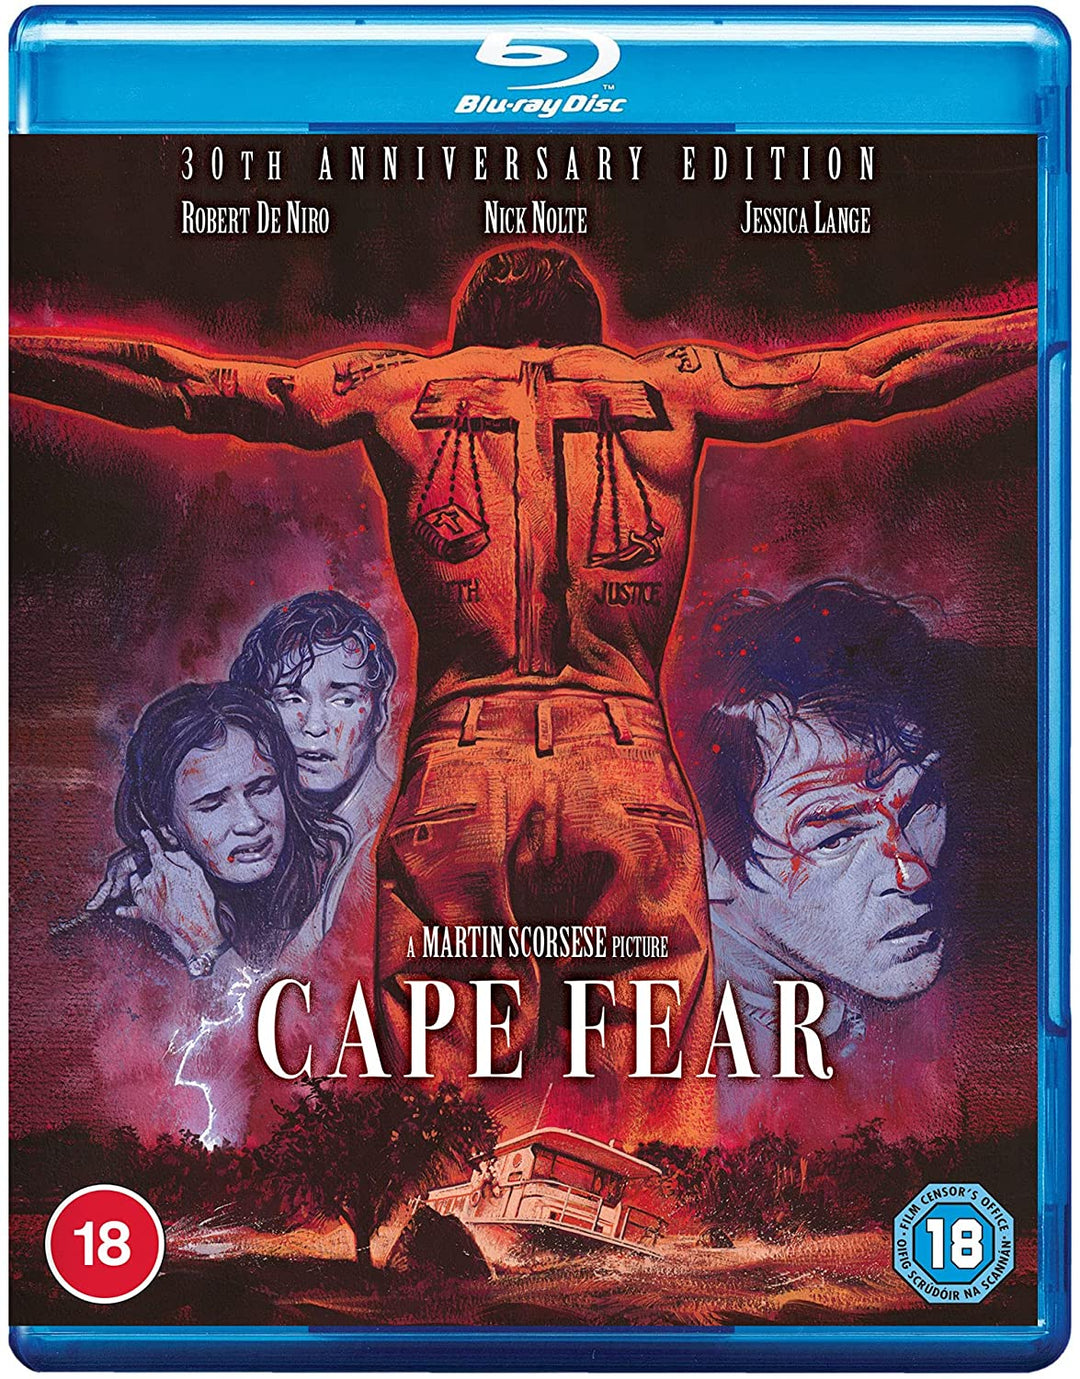 Cape Fear - 30th Anniversary [1991] - Crime/Psychological thriller [Blu-ray]